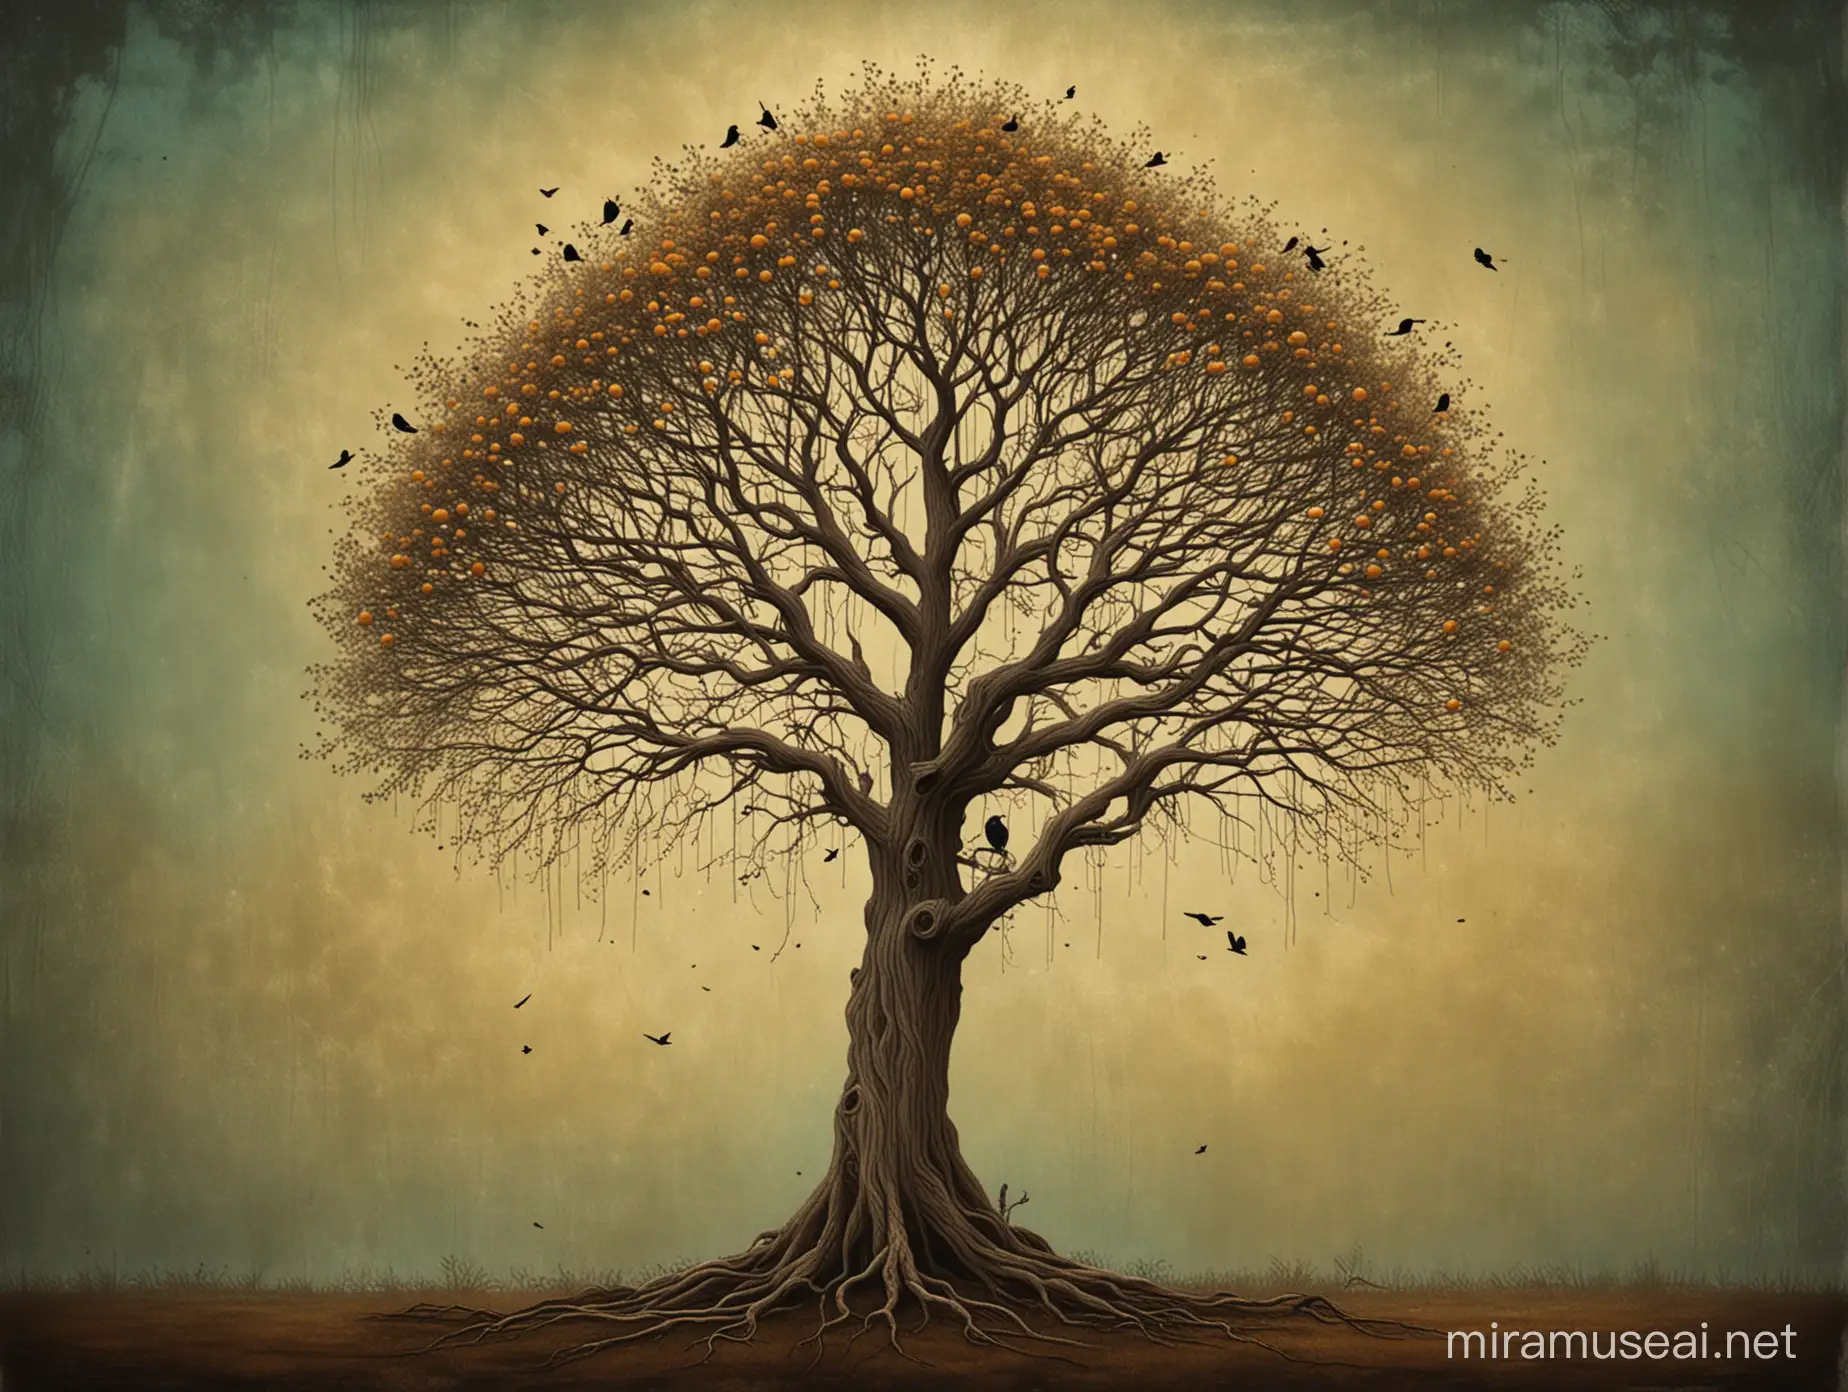 Enchanted Tree with Birds Nests Art by Andy Kehoe